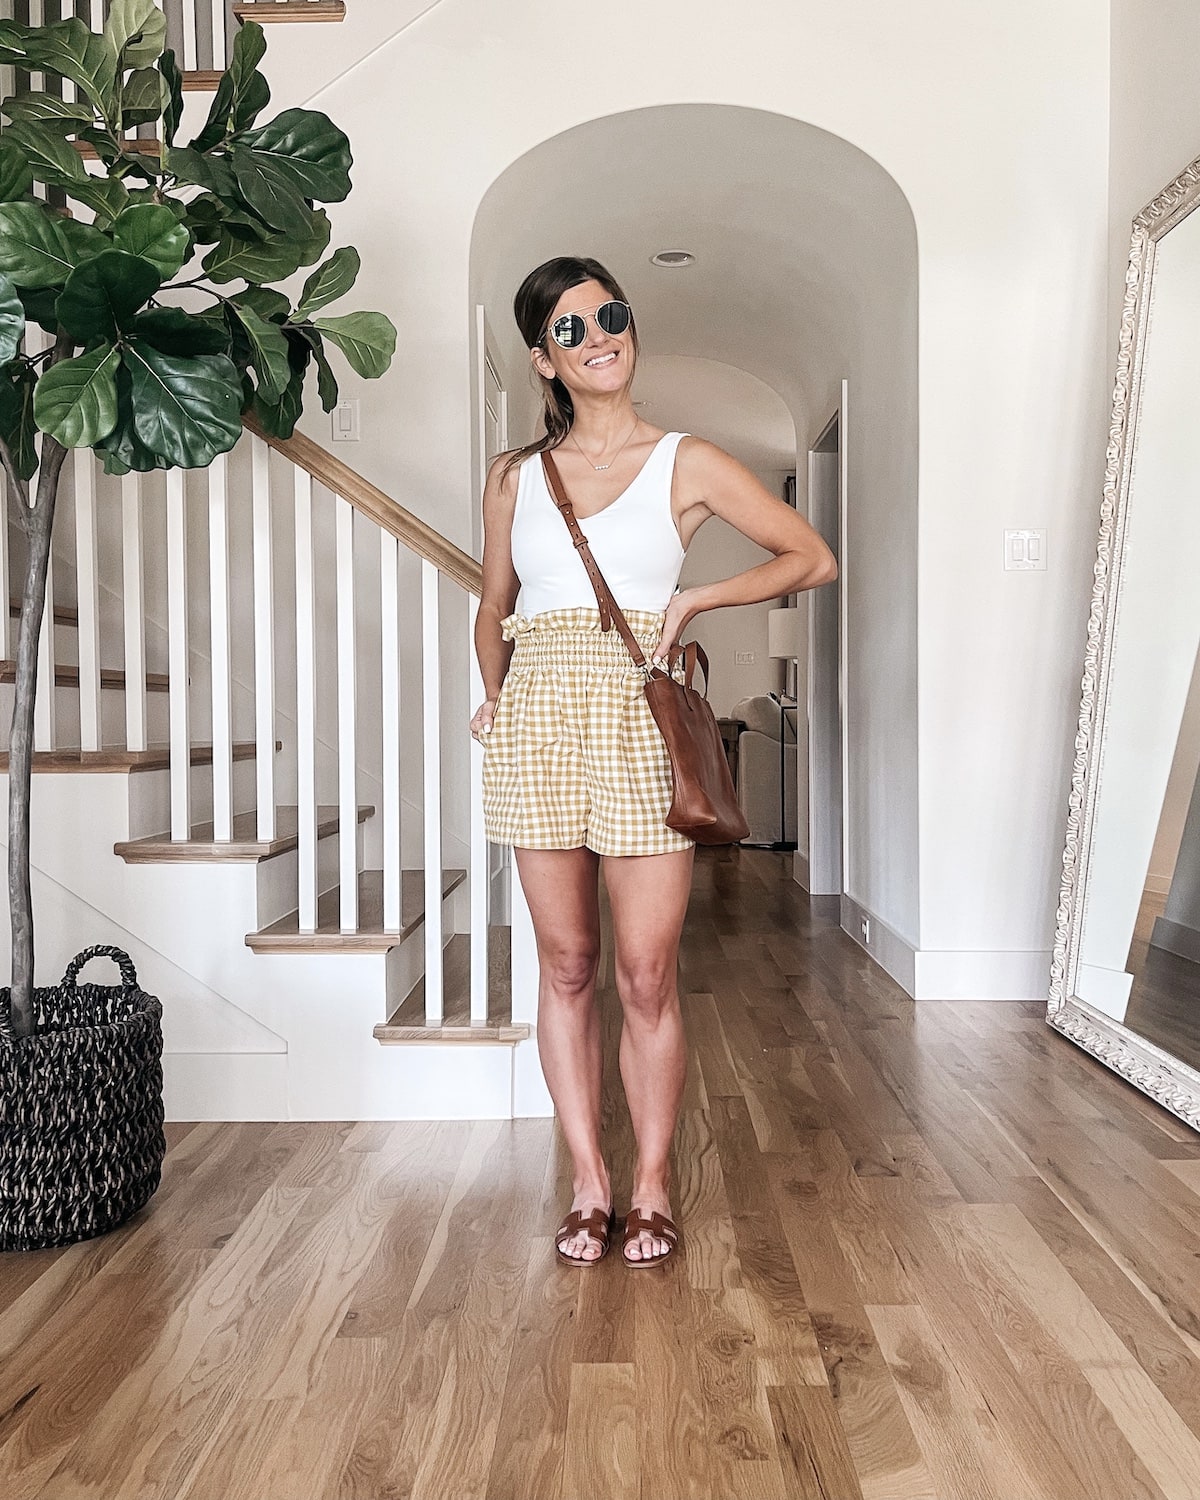 brighton butler wearing white body suit with gingham shorts